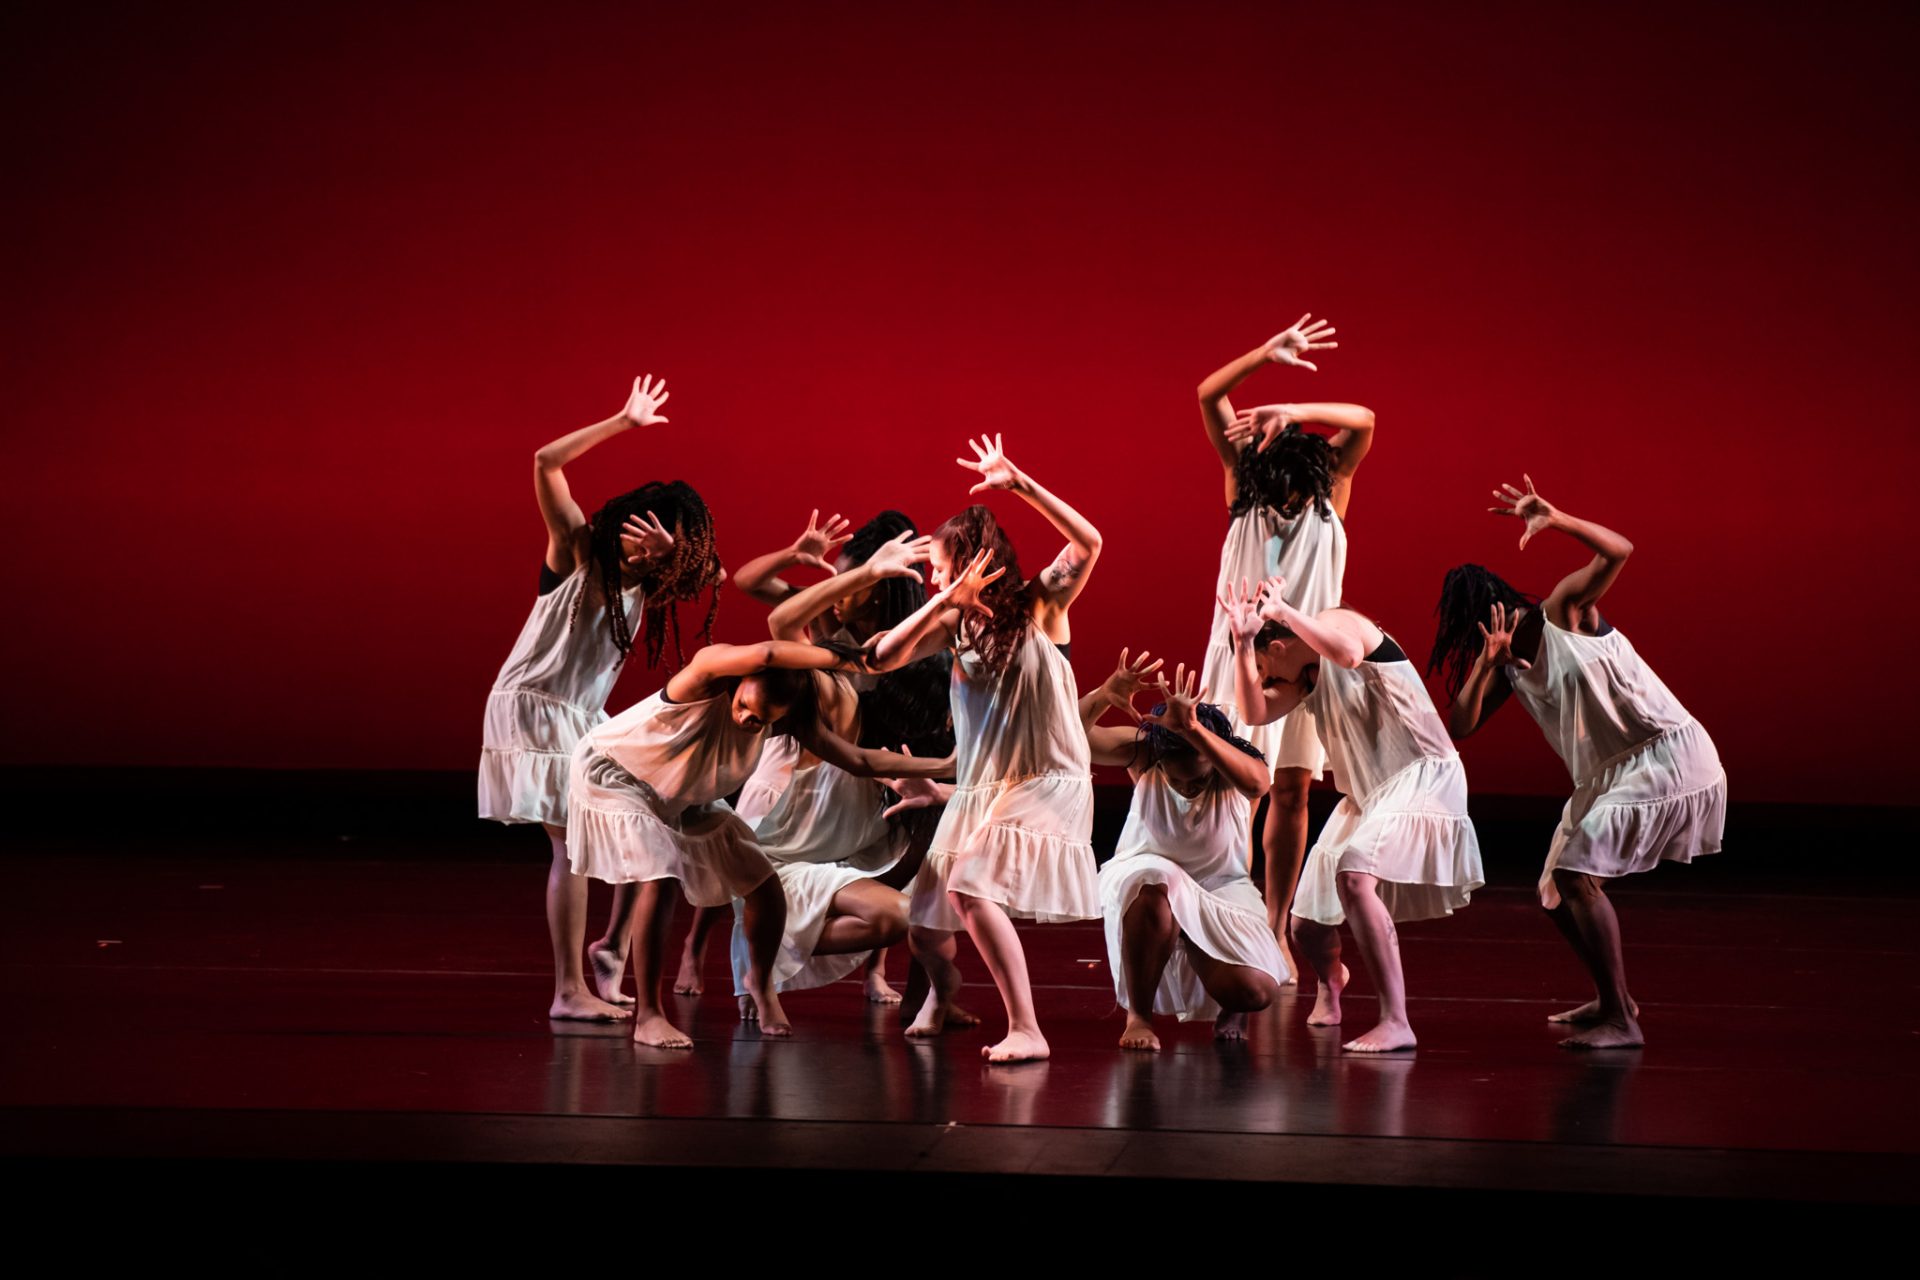 Danse4Nia Repertory Ensemble at the 32nd Annual International Conference and Festival of Blacks in Dance in Philadelphia.